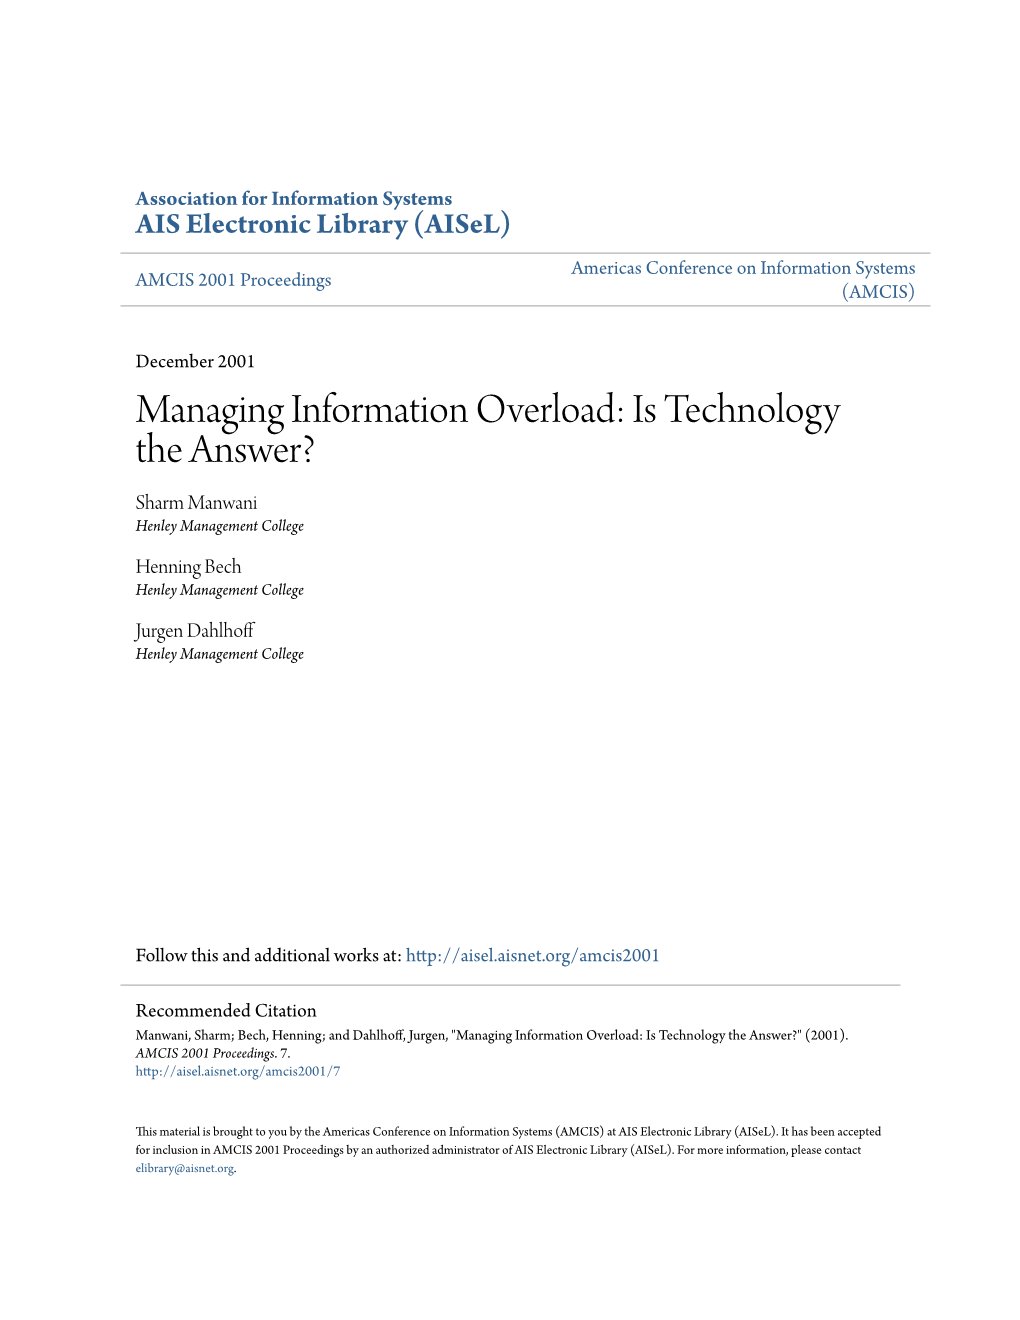 Managing Information Overload: Is Technology the Answer? Sharm Manwani Henley Management College